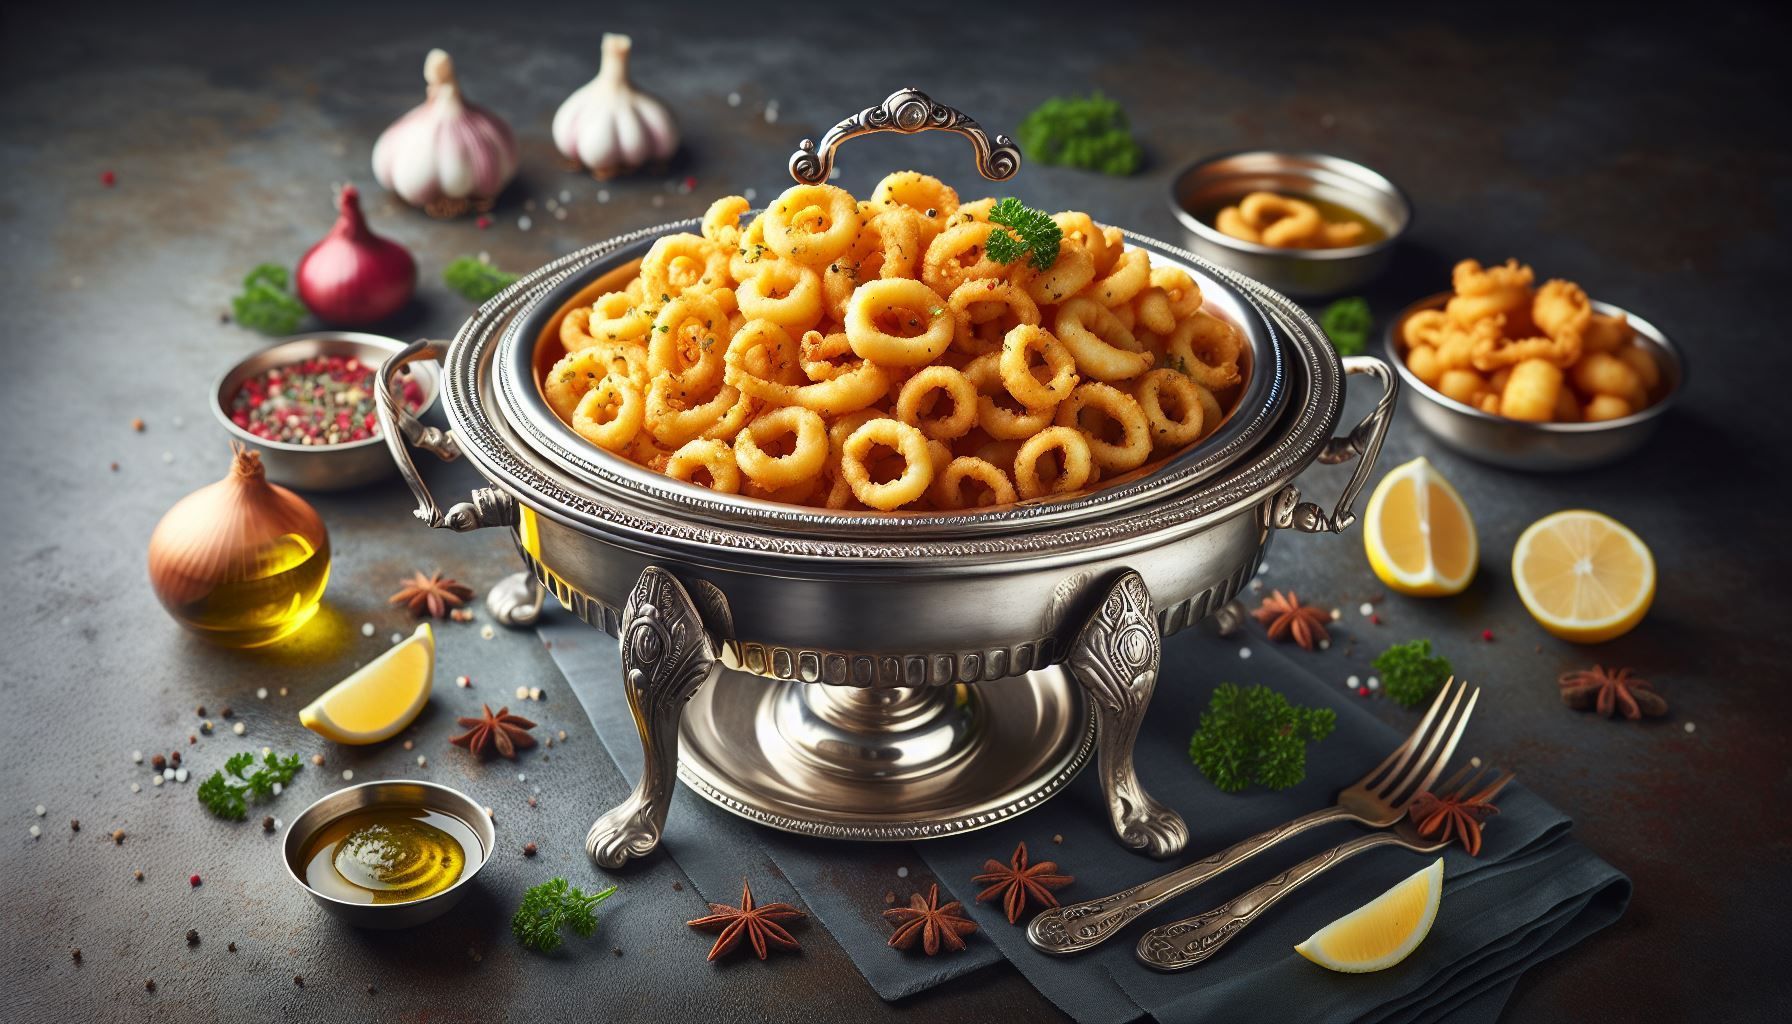 A silver bowl filled with macaroni and cheese rings on a table.